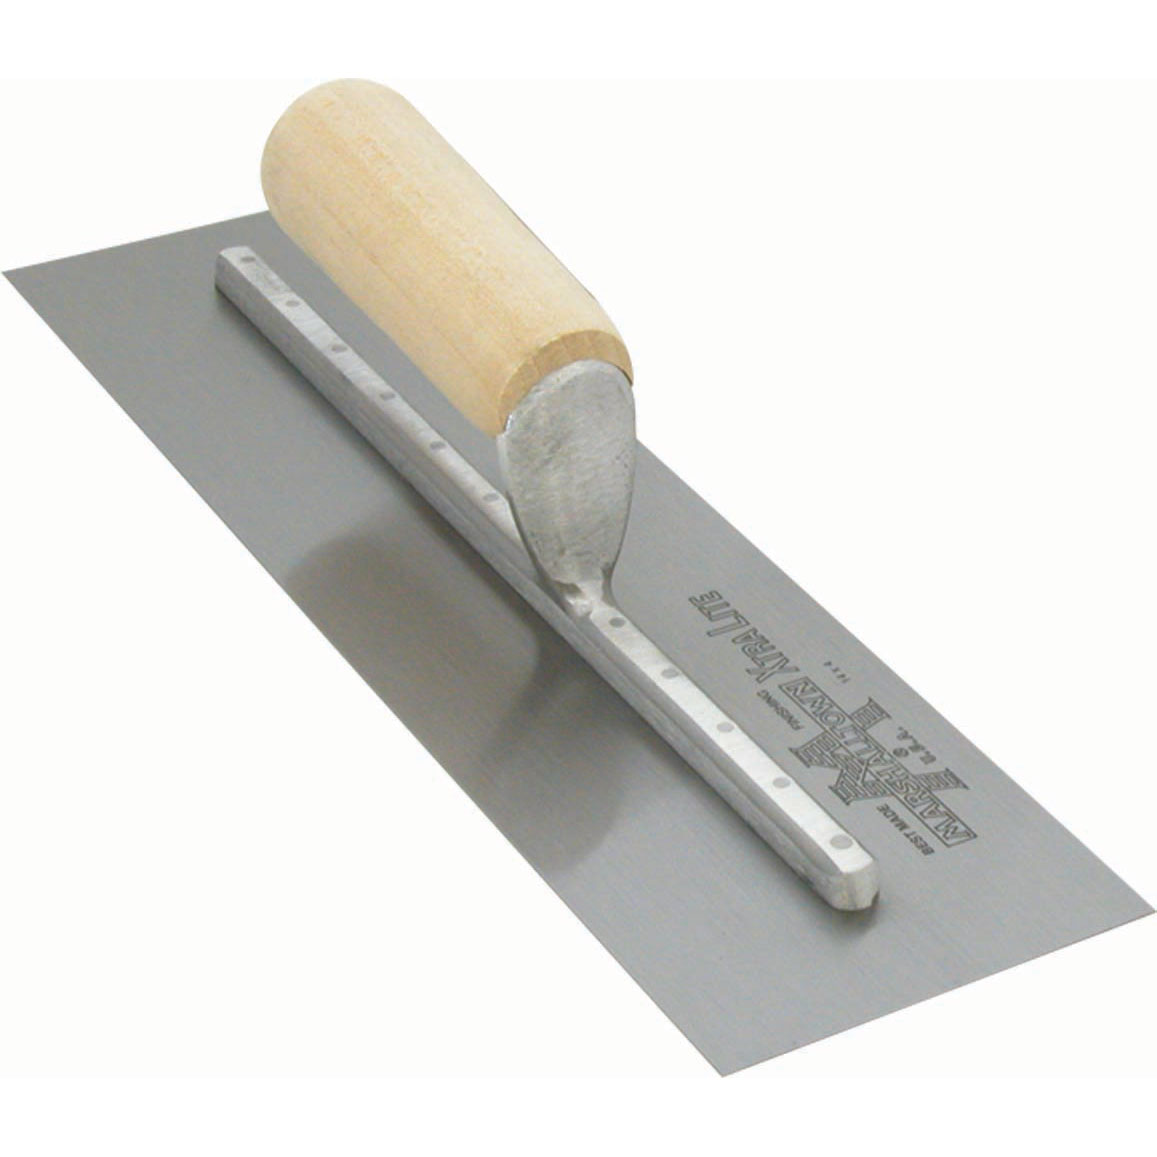 Marshalltown MX56 12in x 3in Finishing Trowel with Straight Wood Handle MX56